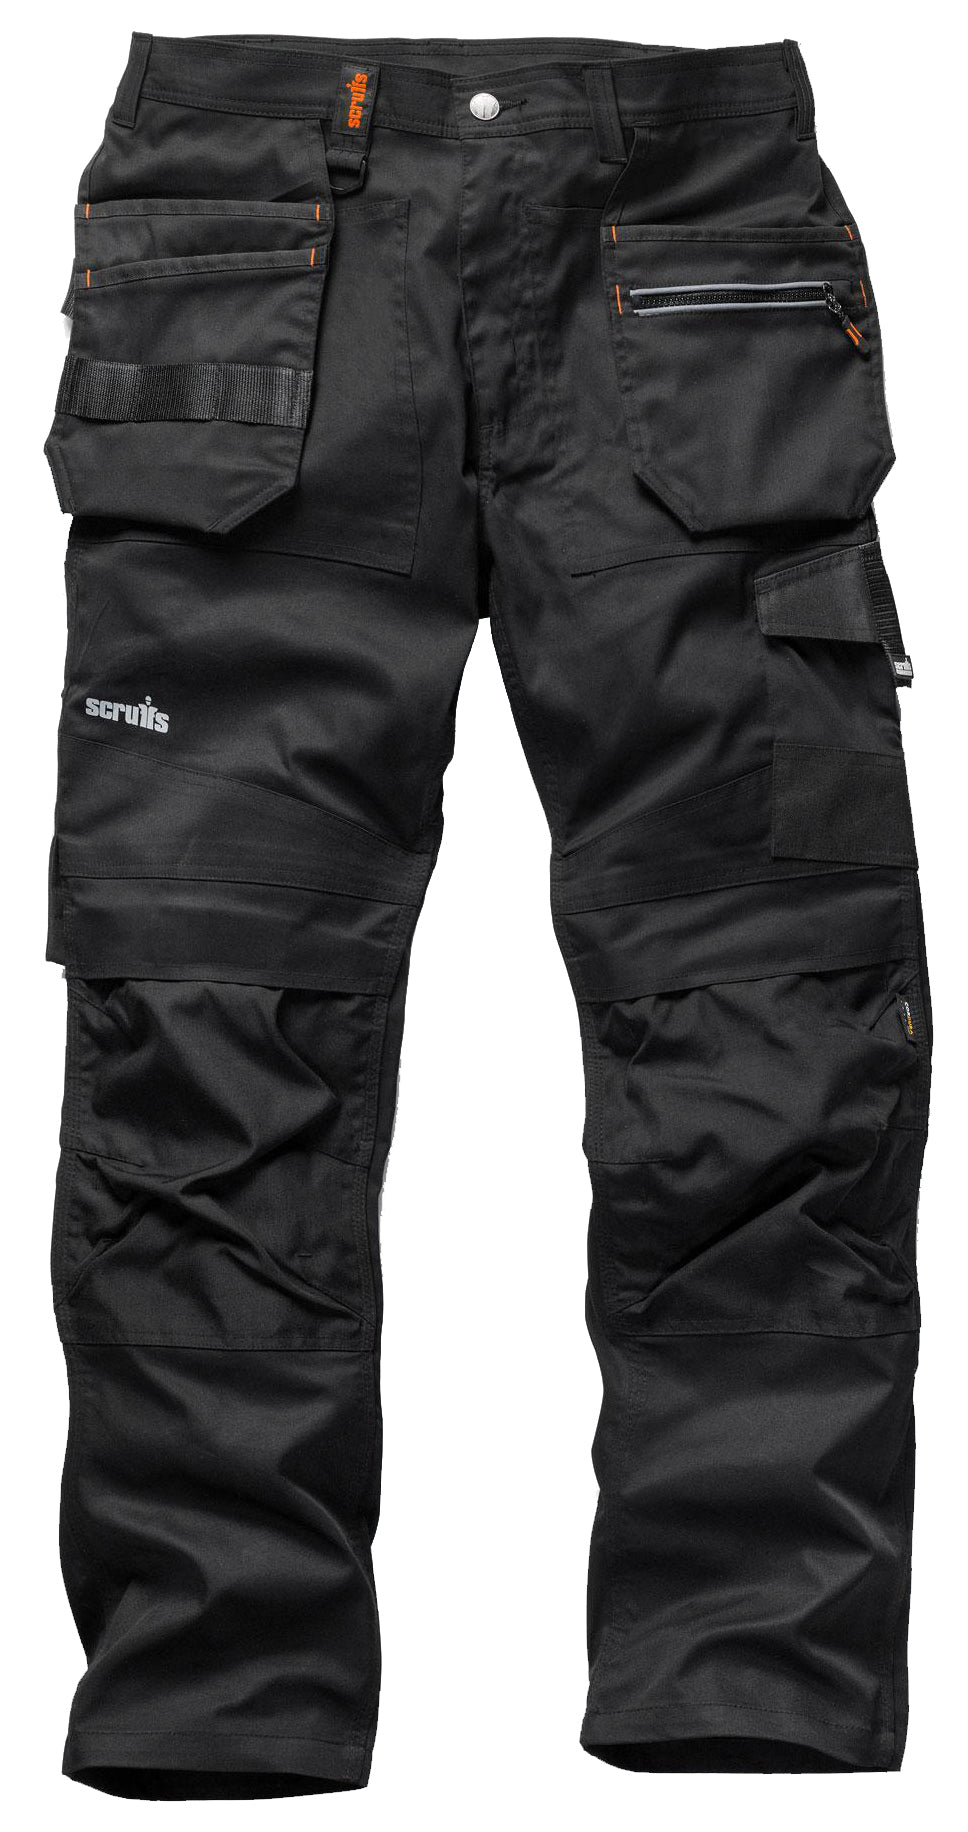 SCRUFFS Trade Flex Trousers - Black - Various Sizes Available